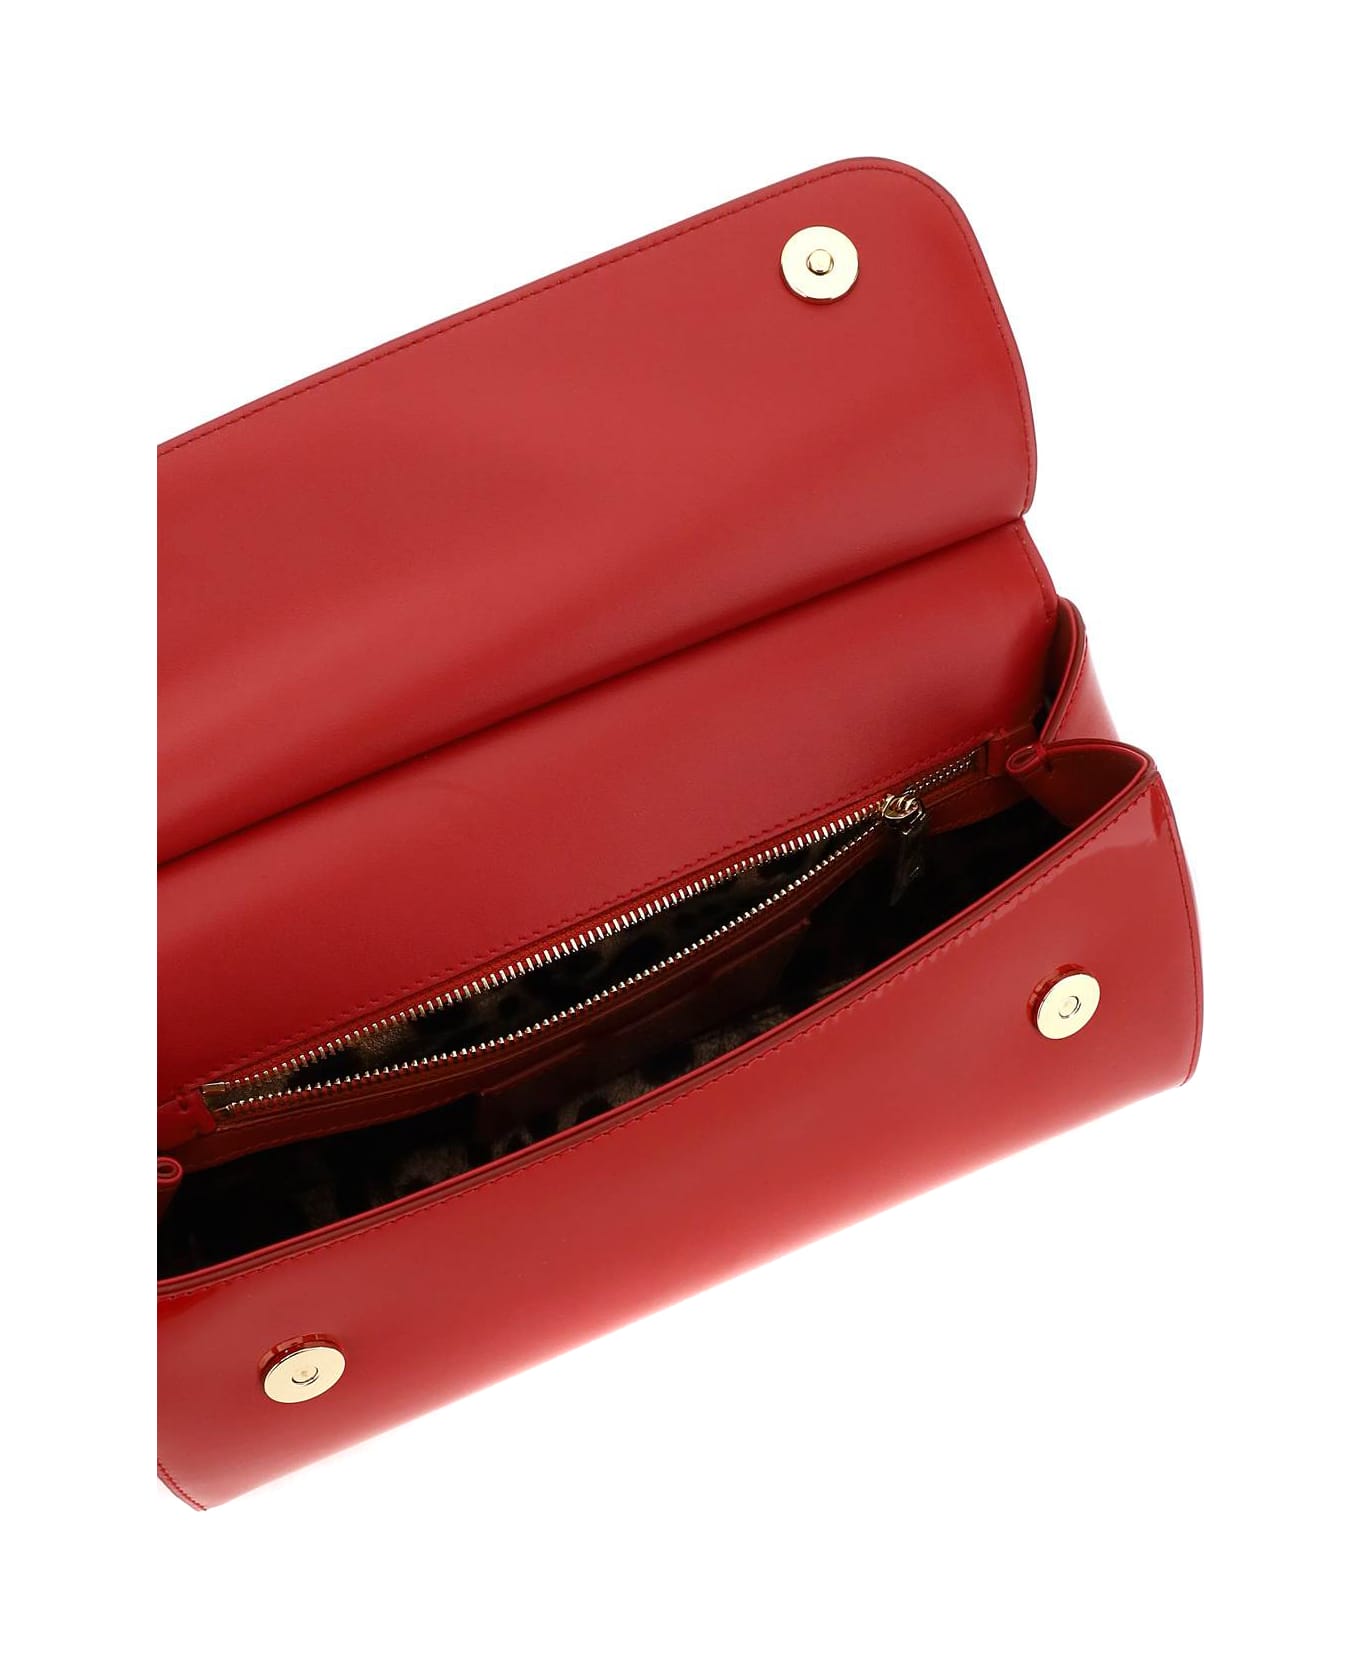 Dolce & Gabbana Patent Leather Medium New Sicily Bag - ROSSO (Red) トートバッグ